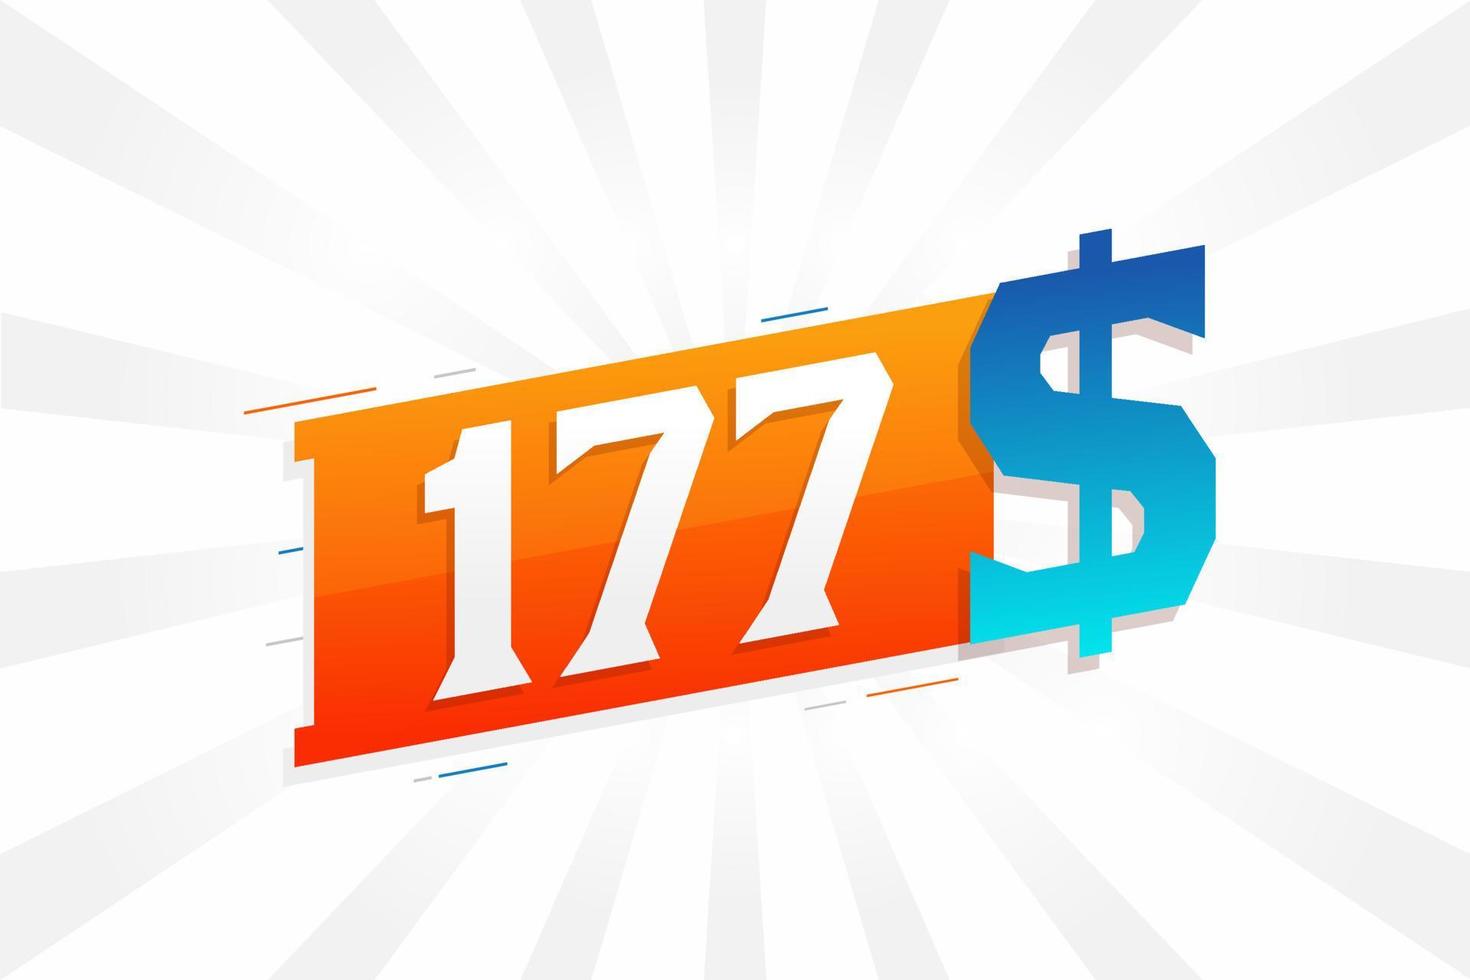 177 Dollar currency vector text symbol. 177 USD United States Dollar American Money stock vector